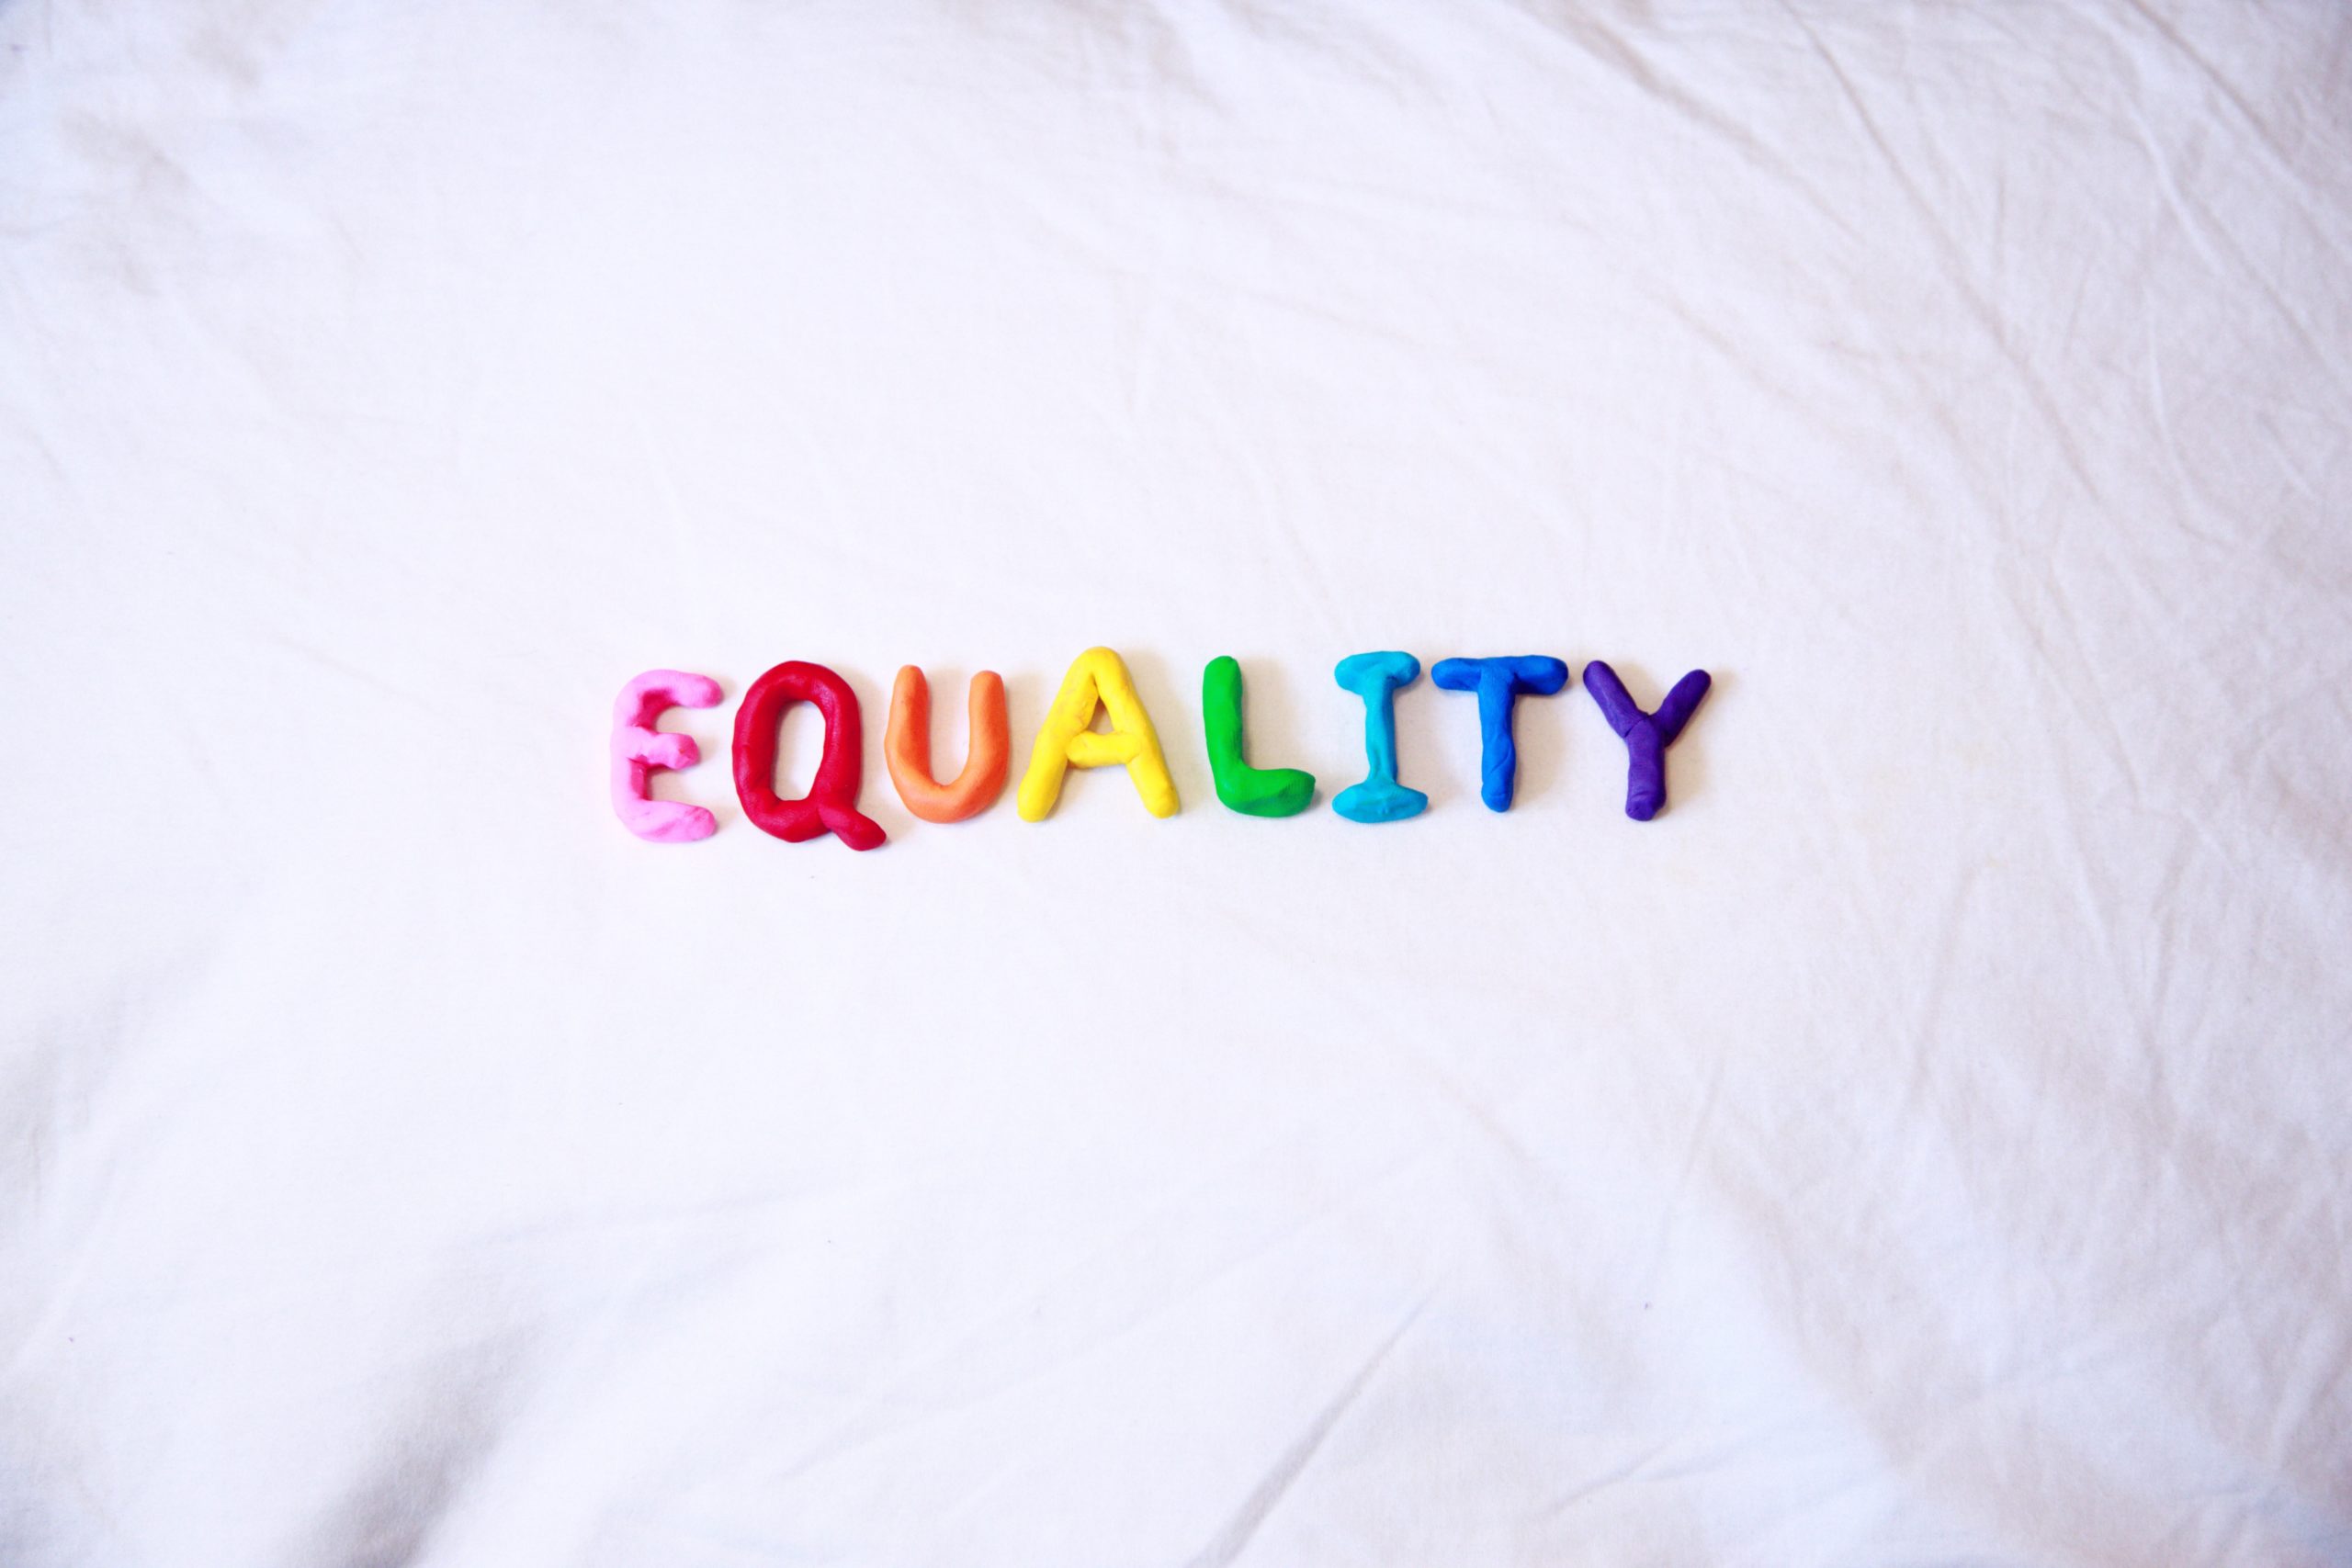 The word equality in rainbow colors.